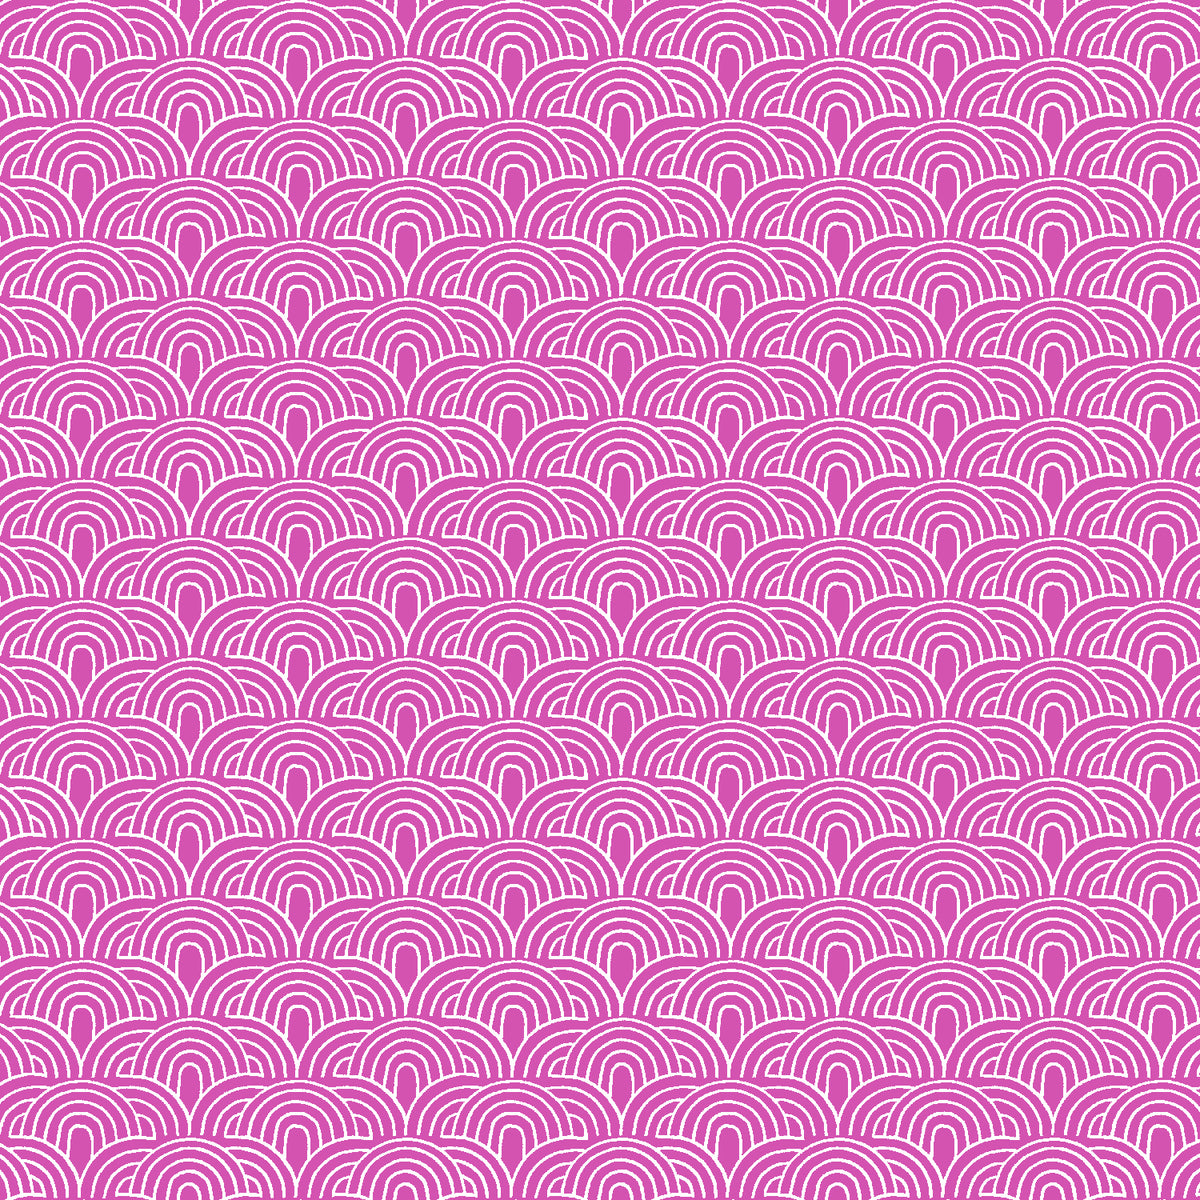 Pink Ribbon Quilt Fabric - Pink Ribbon Floral in Pink - EVIE-C7197 PIN –  Cary Quilting Company